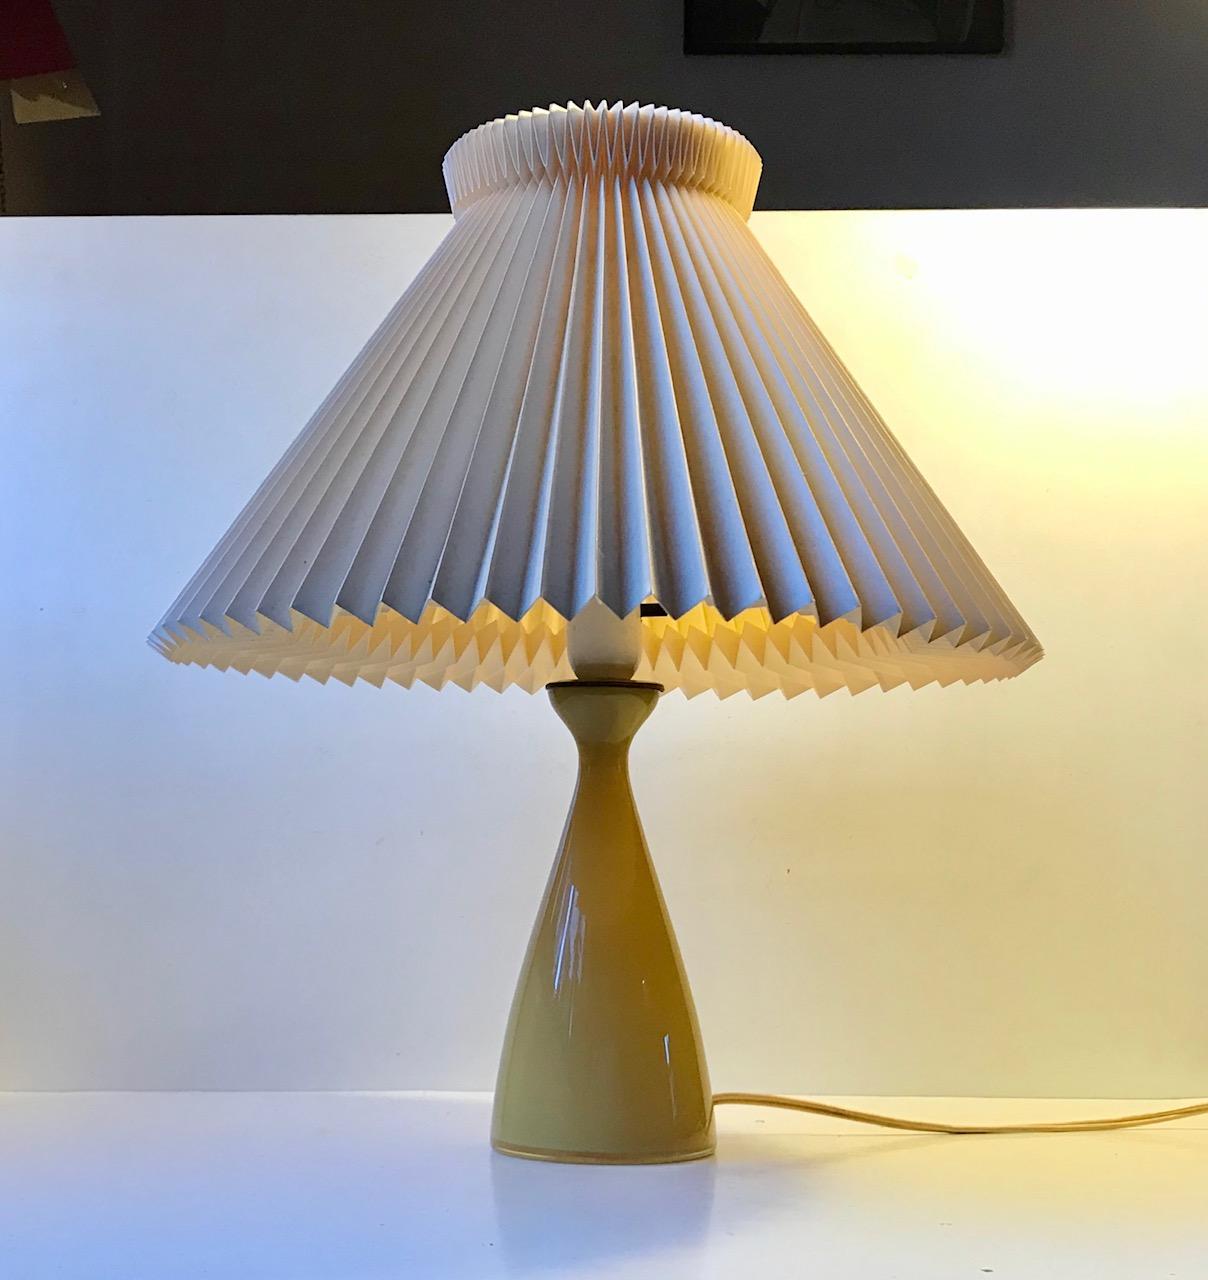 A rare organically shaped table light in cased honey yellow glass. Designed by the kid-brother of Arne Bang alias Jacob E. Bang in the mid to late 1950s. Manufactured by Holmegaard/Kastrup in Denmark. The shade is a model shade and is not included.